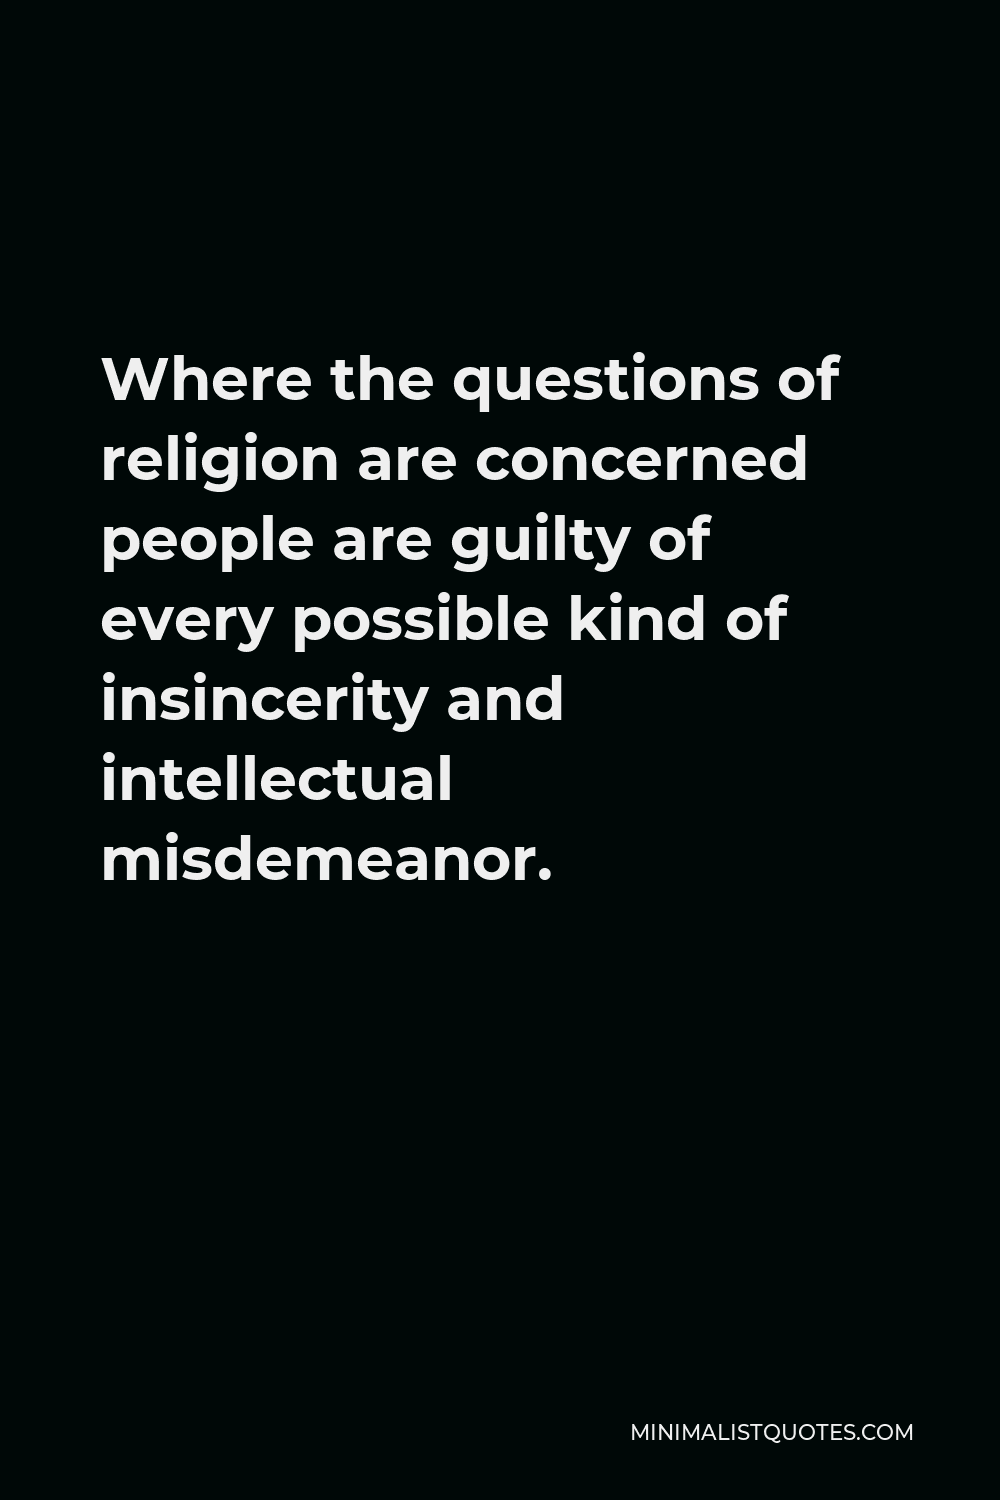 Sigmund Freud Quote Where The Questions Of Religion Are Concerned People Are Guilty Of Every Possible Kind Of Insincerity And Intellectual Misdemeanor